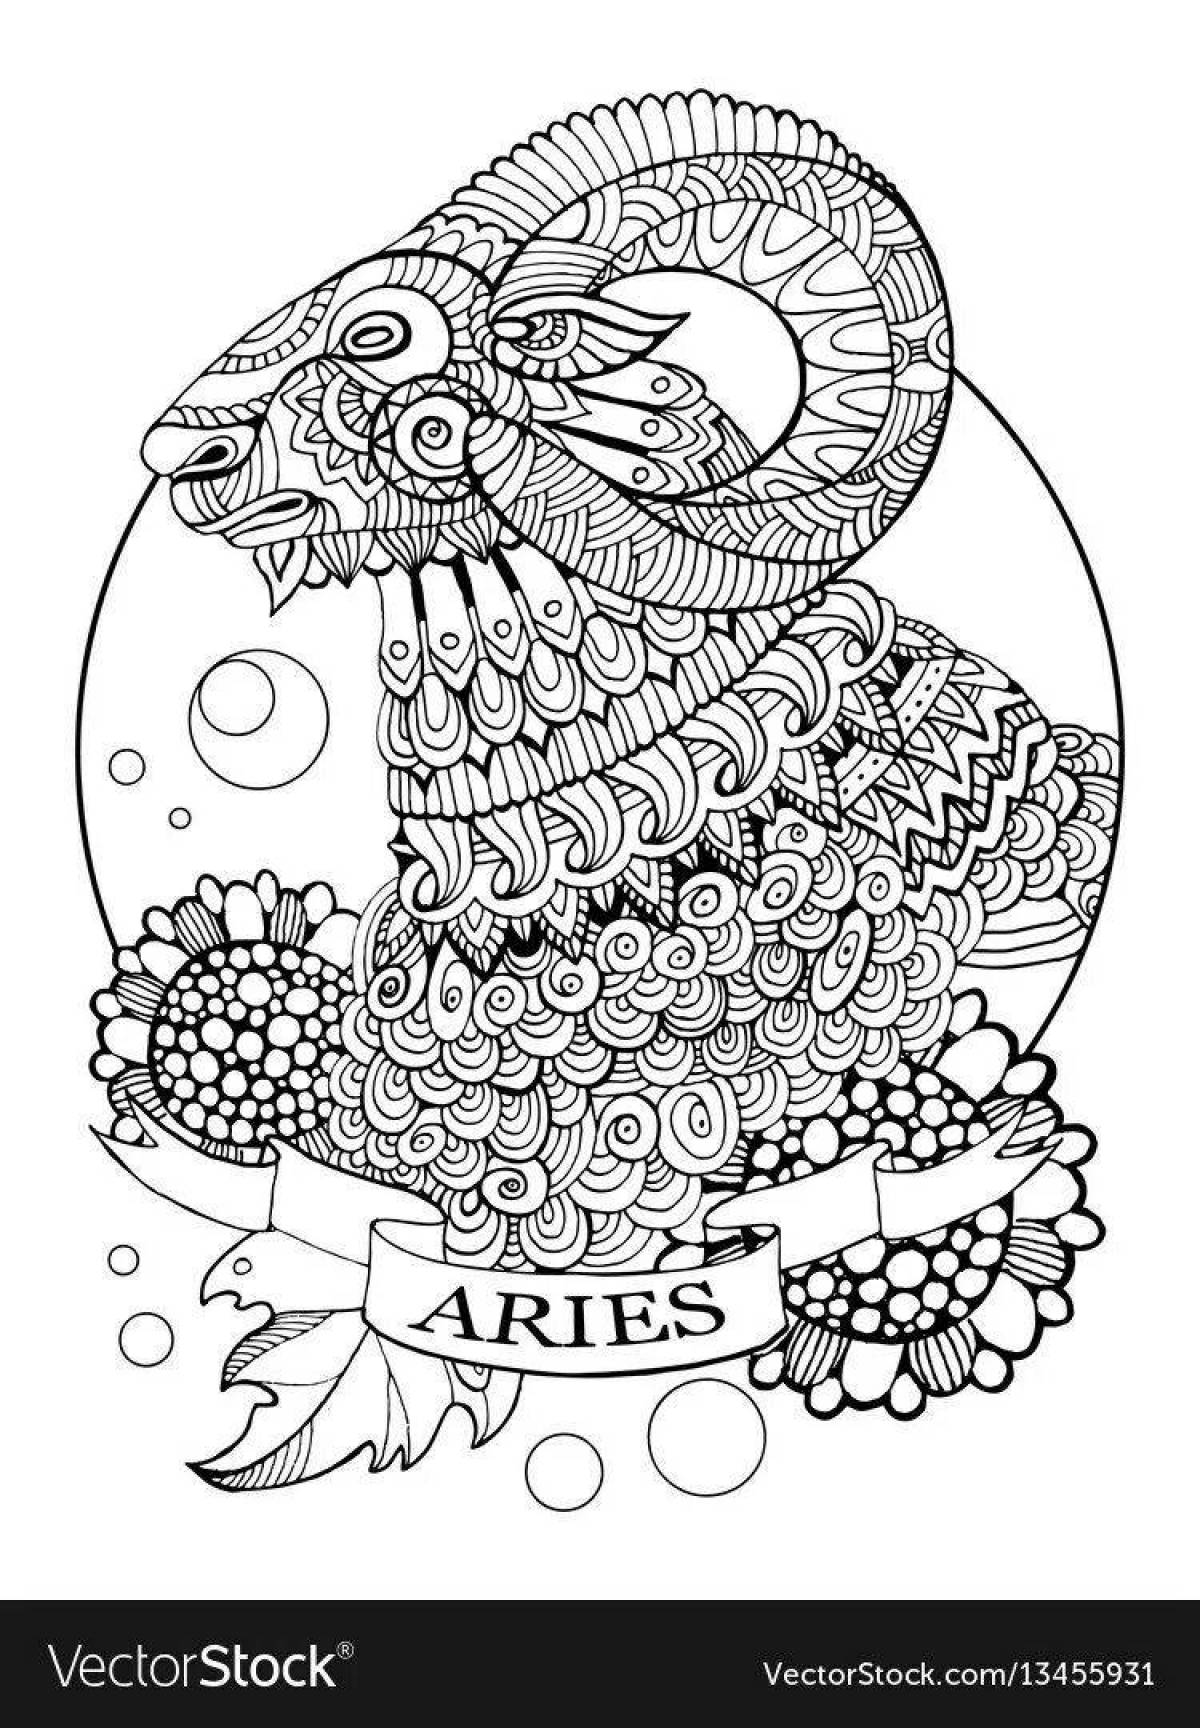 Sublime coloring page antistress capricorn